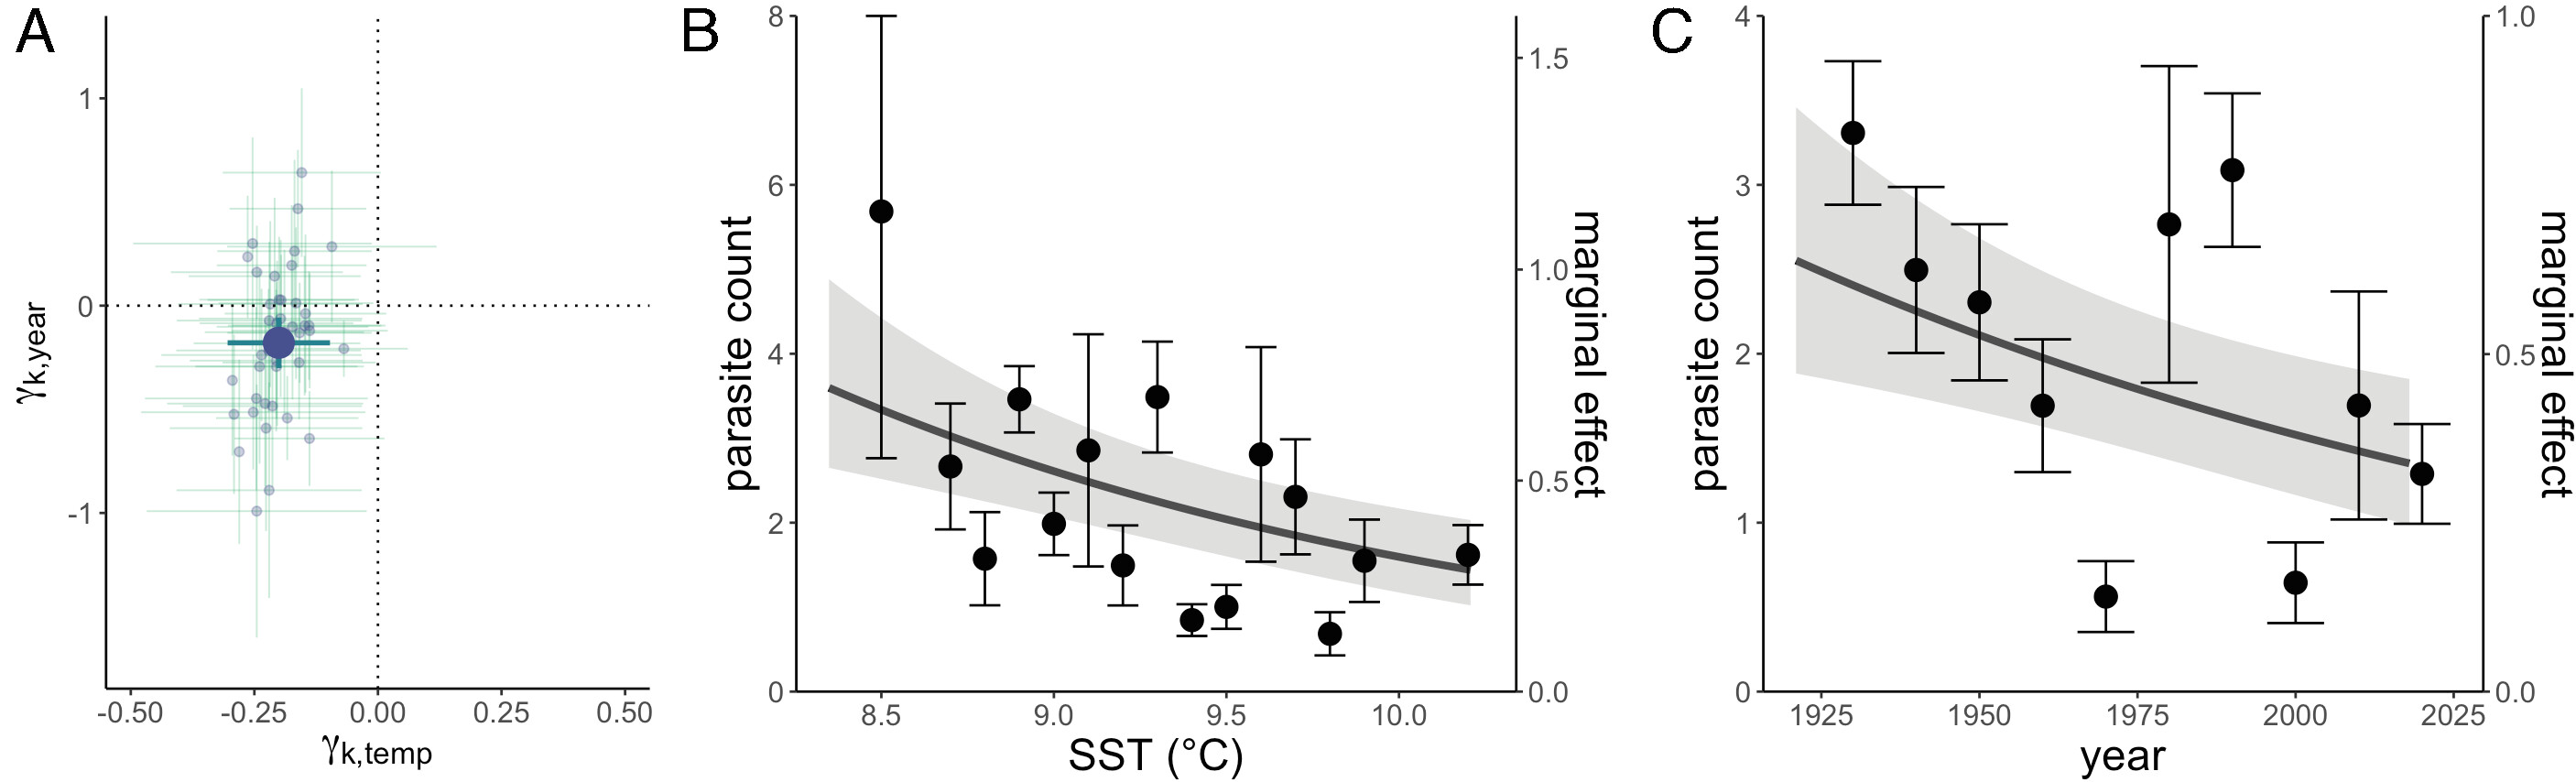 (A) Estimated effects (±SE) of temperature (x axis) and year (y axis) on ocean parasite counts for each parasite taxon (light blue), with mean effect size (±SE) over all taxa (dark blue) that have three or more obligately required hosts. (B) Parasite count as a function of SST in degrees Celsius in the year of the host’s collection (left axis, points) and fitted relative density of predictions (right axis, line). Points are parasite counts averaged within 0.1-degree increments; increments with fewer than 25 observations were excluded from this plot. (C) Parasite count as a function of year of the host’s collection (left axis, points) and fitted relative density of predictions (right axis, line). Points are parasite counts averaged within 10-y increments; increments with fewer than 25 observations were excluded from this plot. For both (B) and (C), the line represents predictions from a generalized linear mixed model, and the ribbon indicates ±1 SE of prediction. Predictions are for an average parasite taxon of an average host–parasite pair. Because of differences in baseline prevalence and counts when present, the prediction line for an average parasite taxon and average host–parasite pair (the marginal effect) will not equal the averages across data bins. Graphic: Wood, et al., 2023 / PNAS